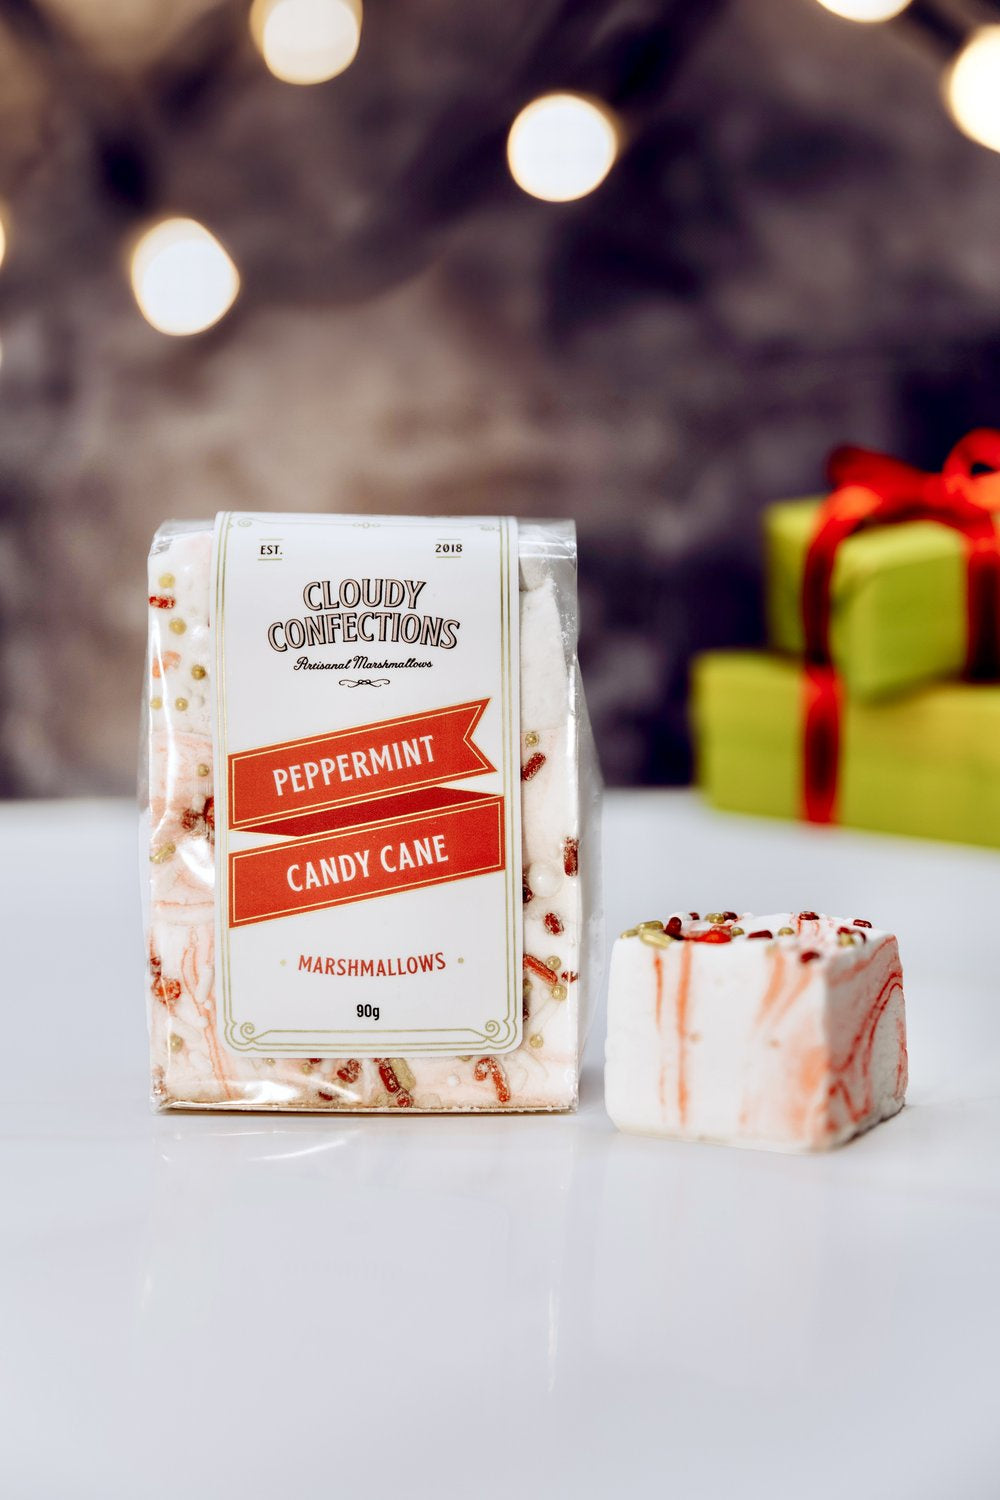 Cloudy Confections Peppermint Candy Cane Marshmallows